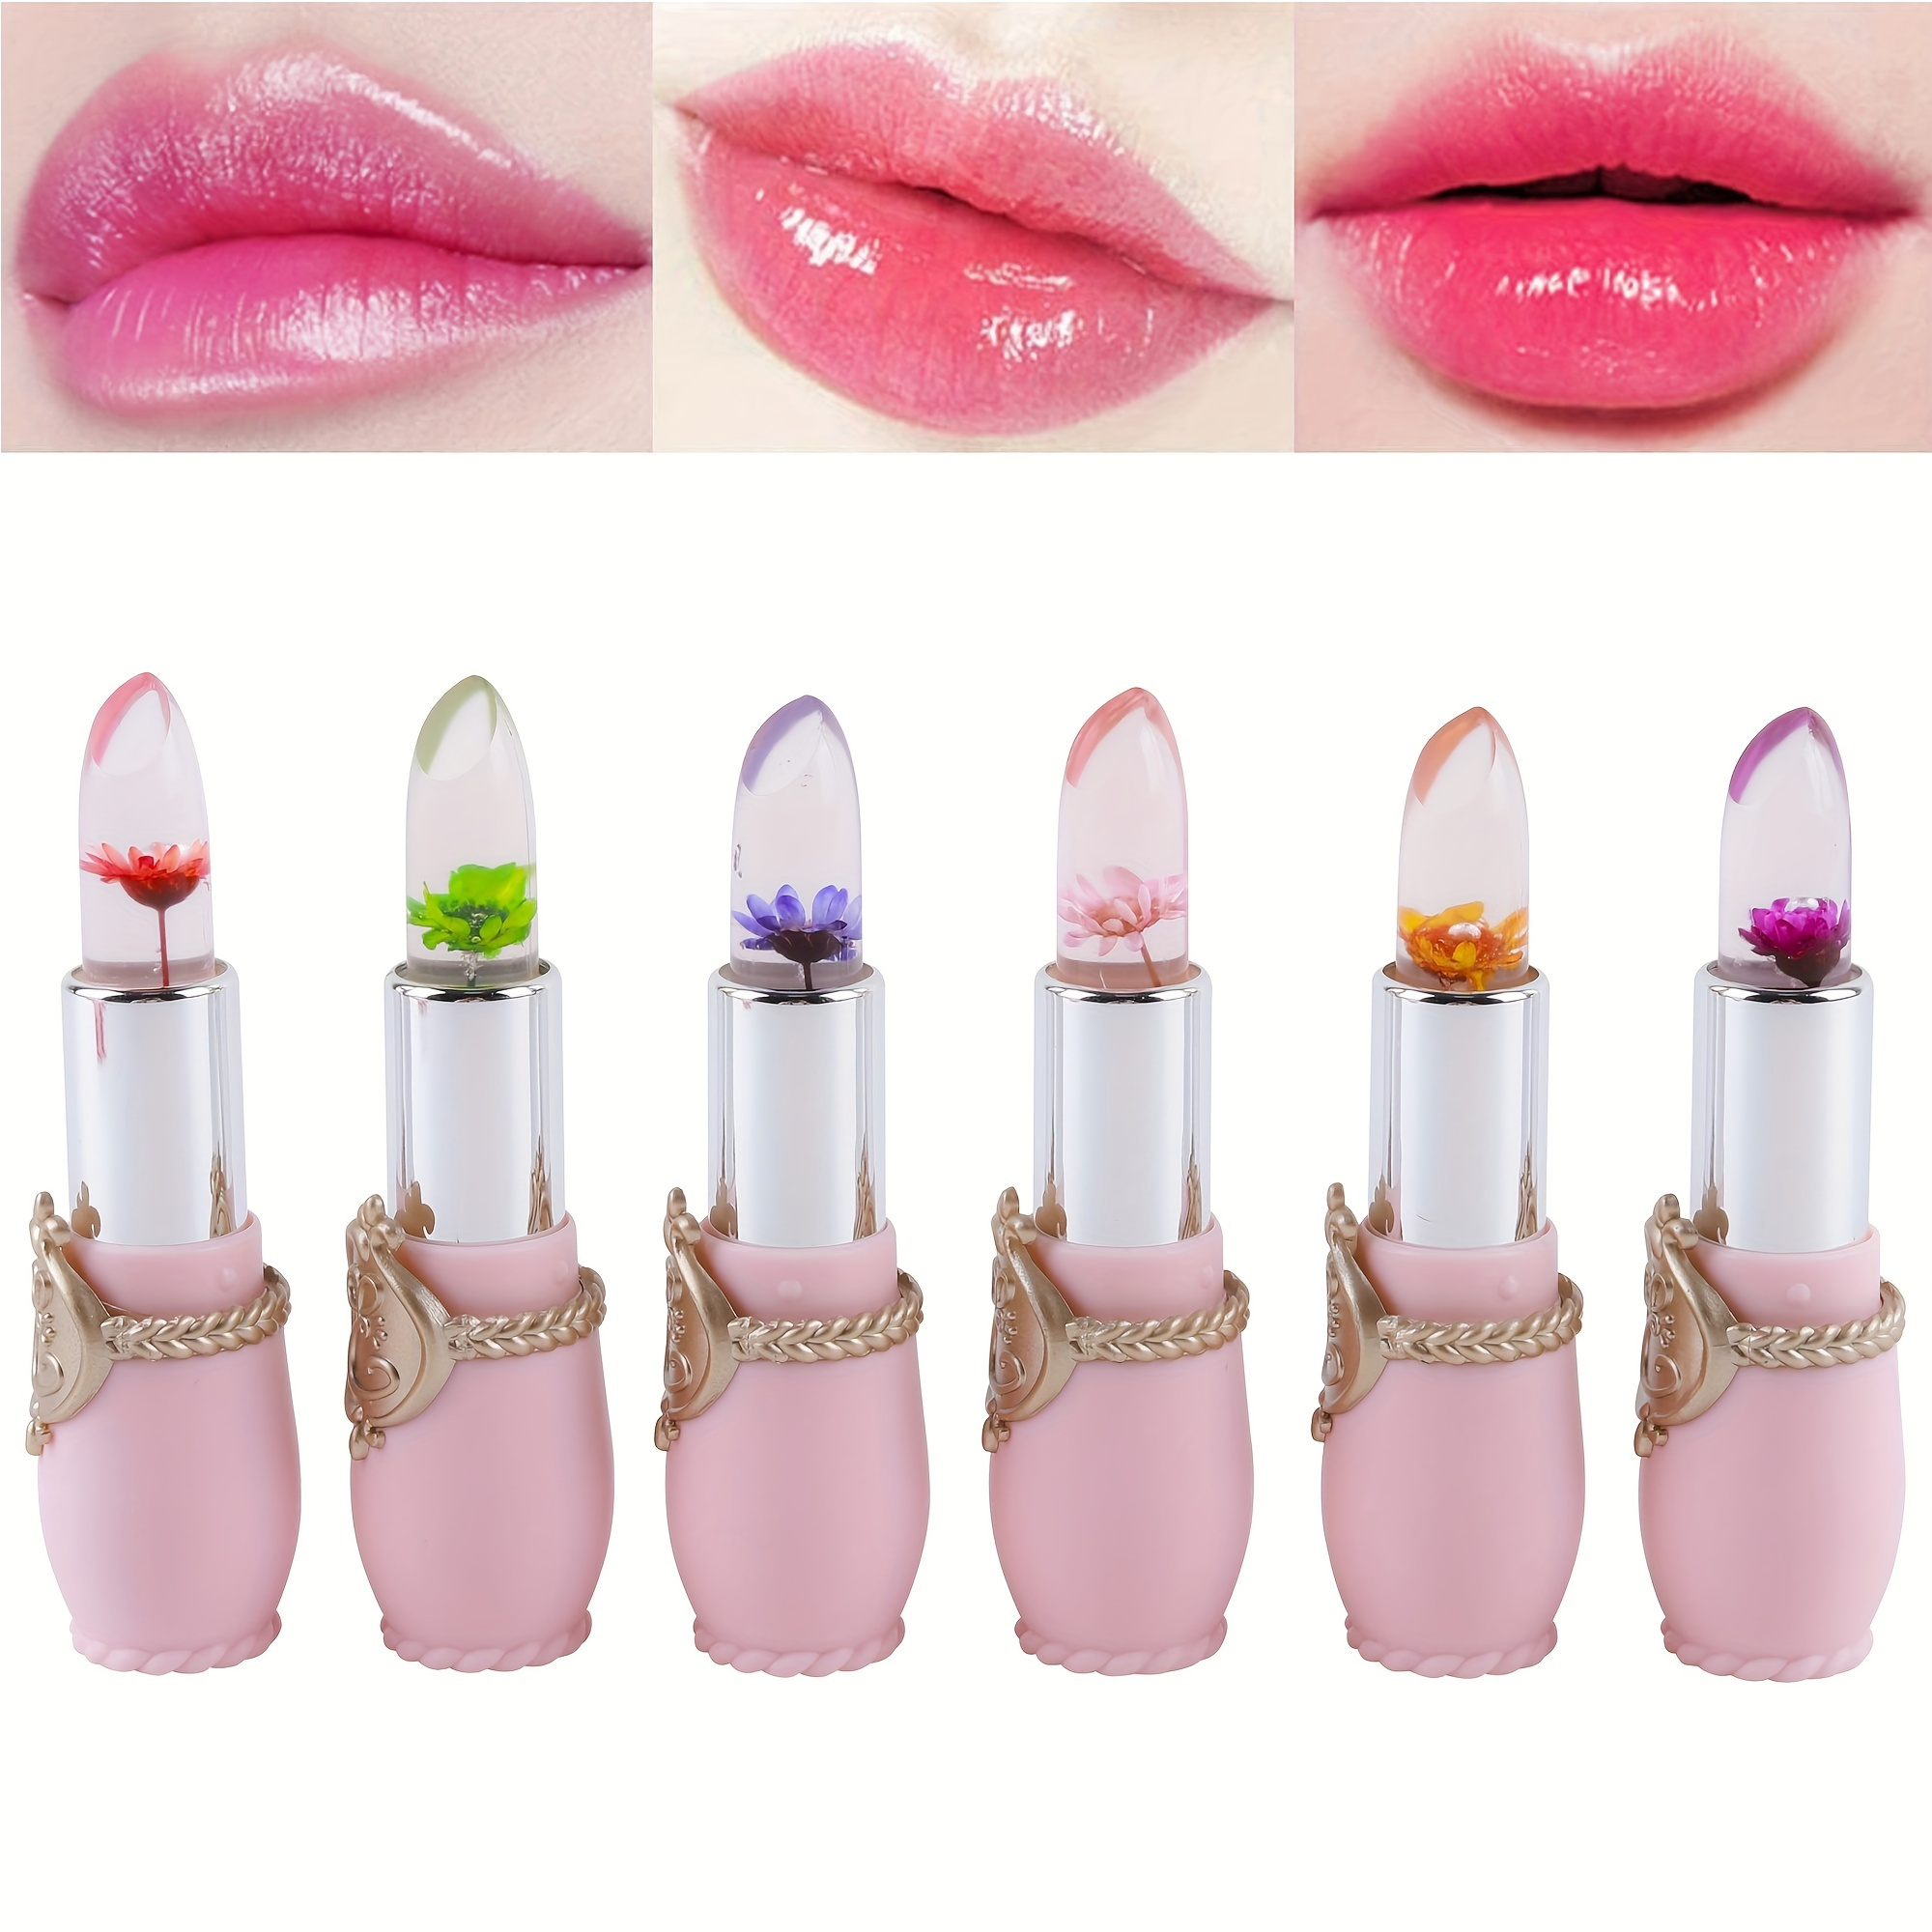 

6 Pcs Moisturizing Temperature Changing Jelly Lipstick - Long Lasting Nourishing Lip Balm With Peach Flavor Valentine's Day Gifts